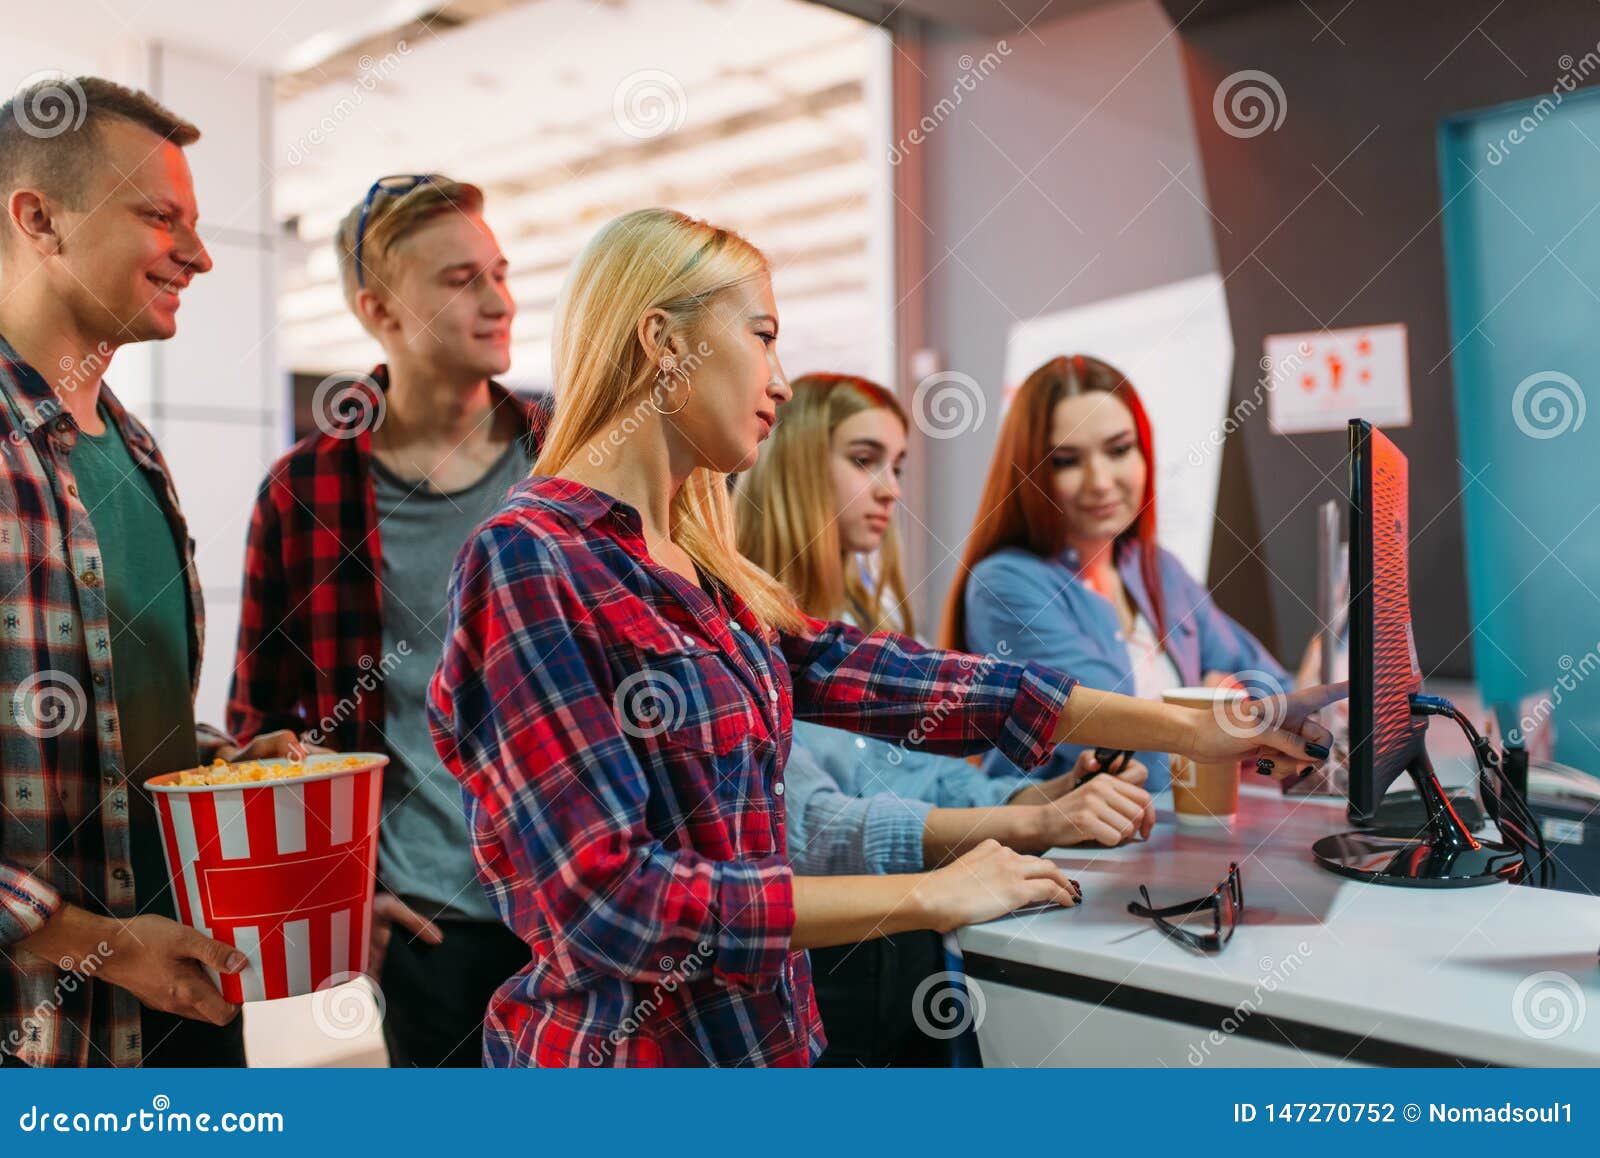 Friends Choosing Movie in Cinema Box Office Stock Photo - Image of girl,  showtime: 147270752